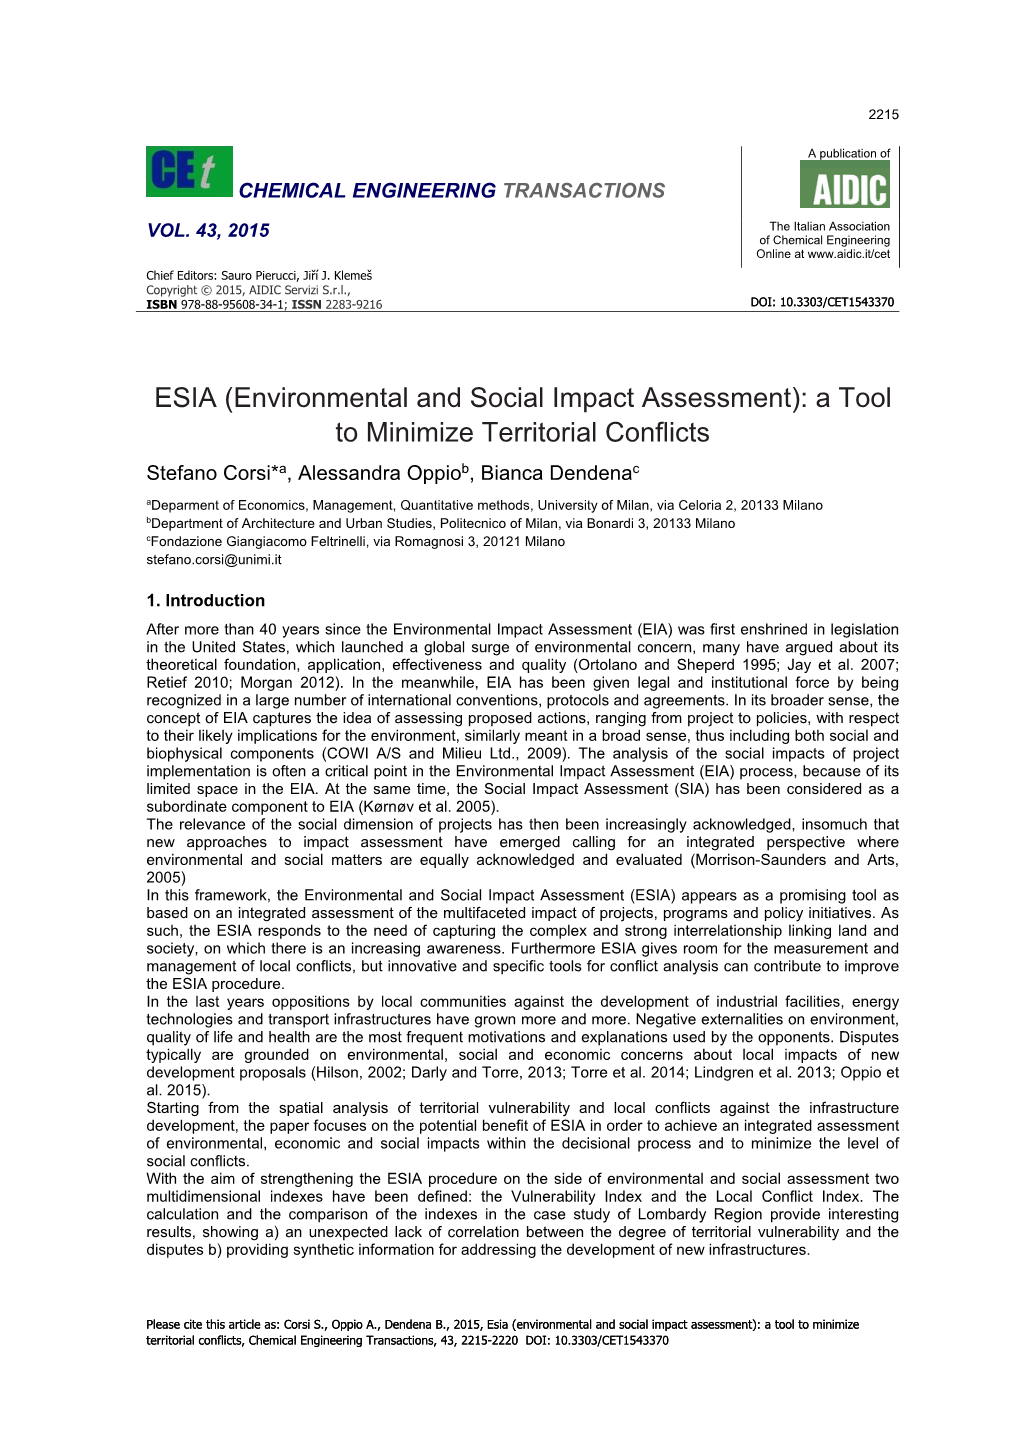 Environmental and Social Impact Assessment): a Tool